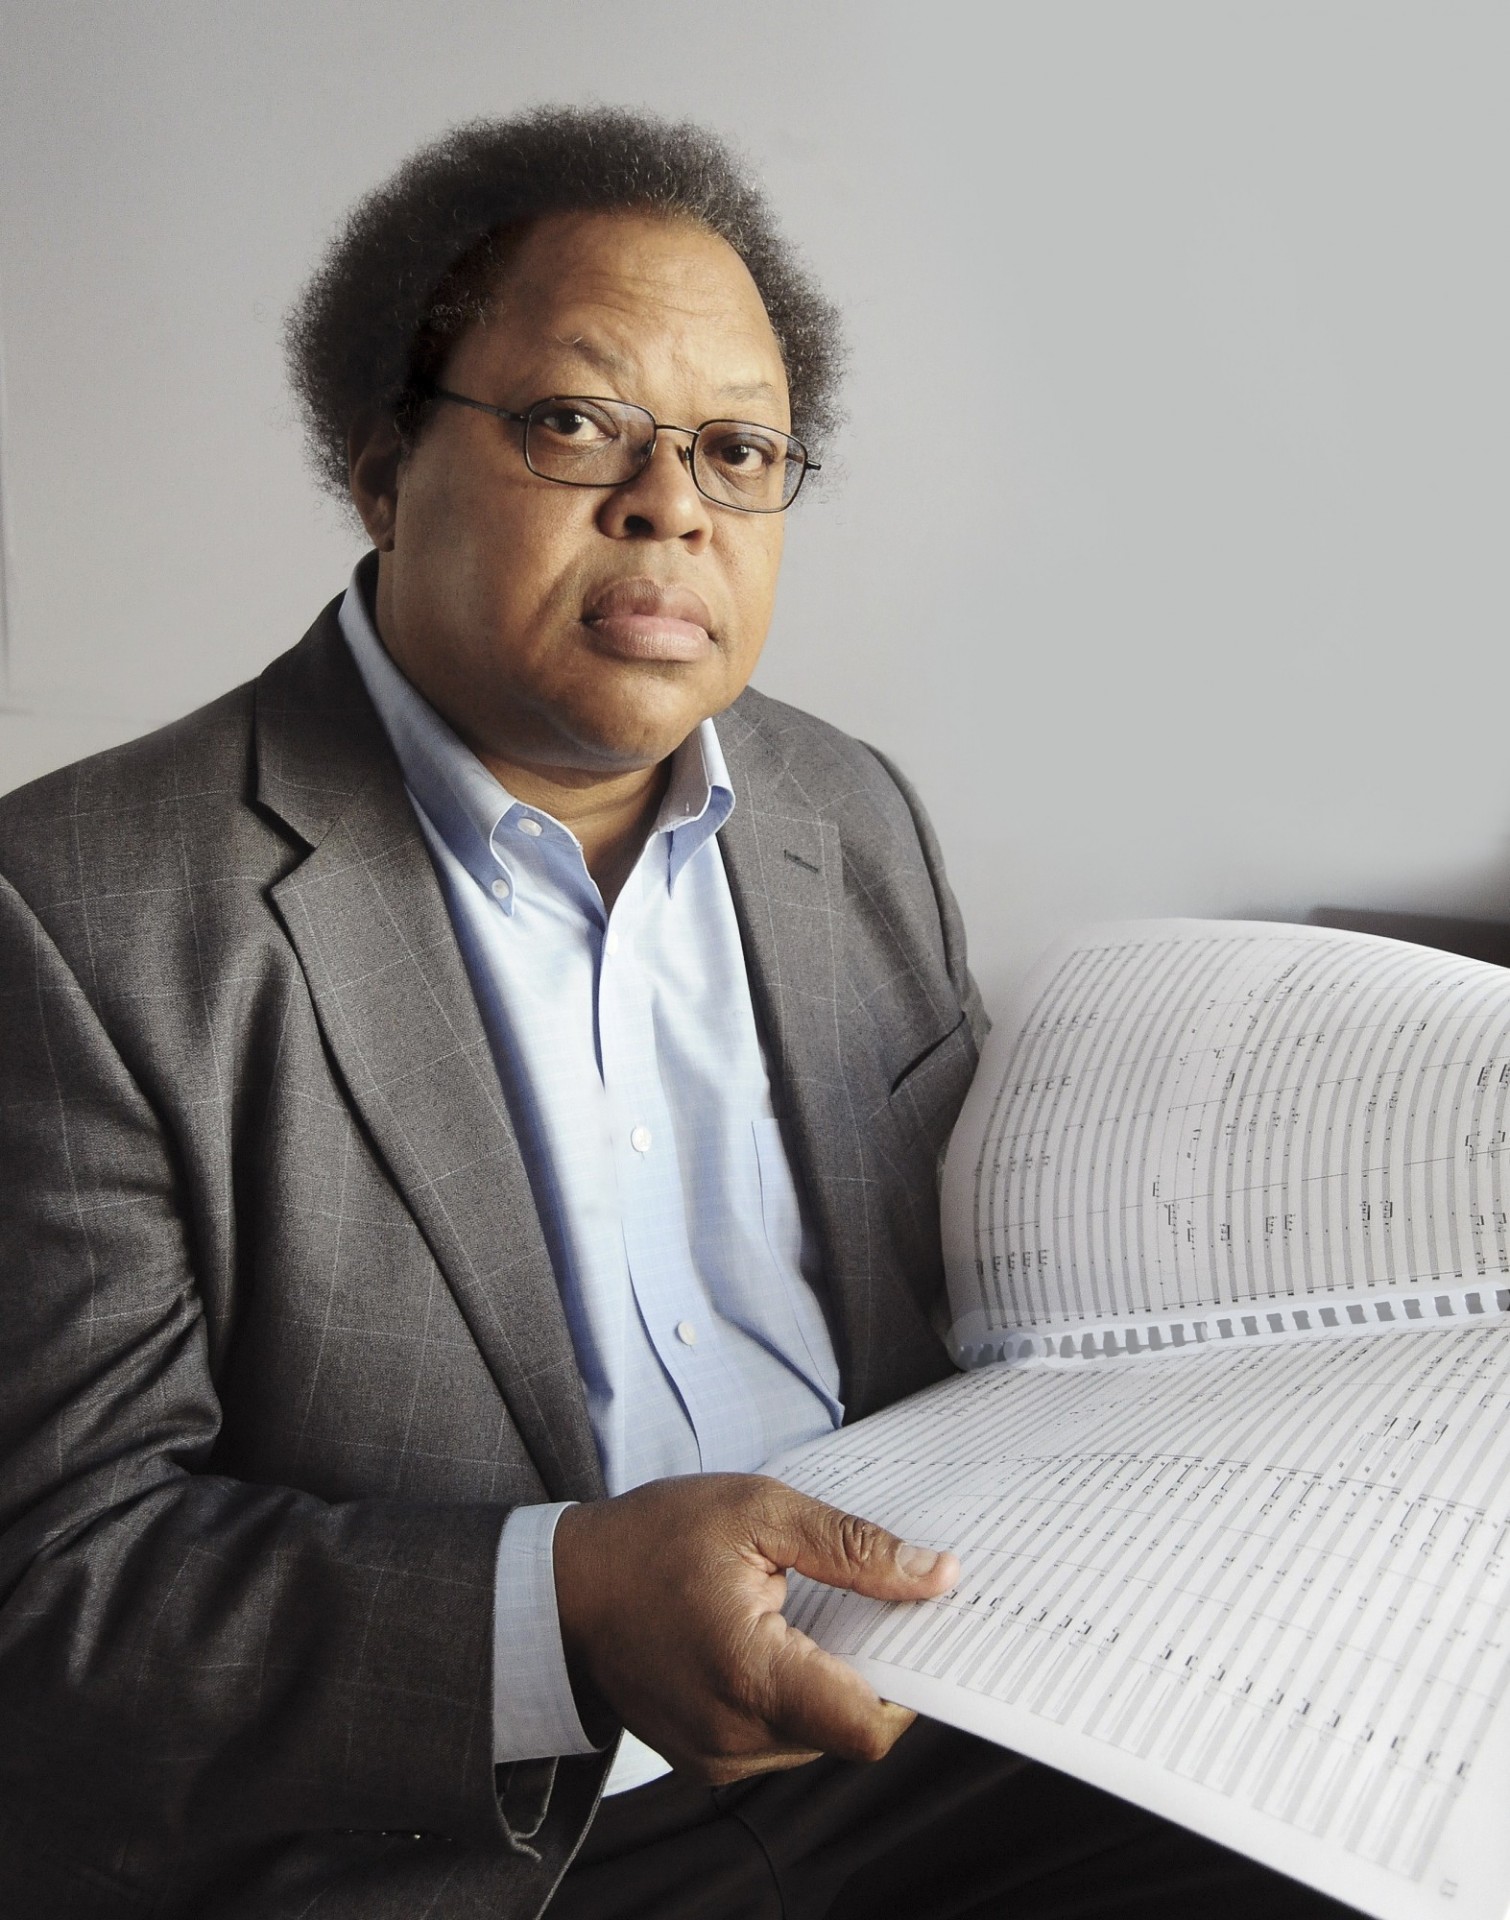 George Lewis. Image by Eileen Barroso.